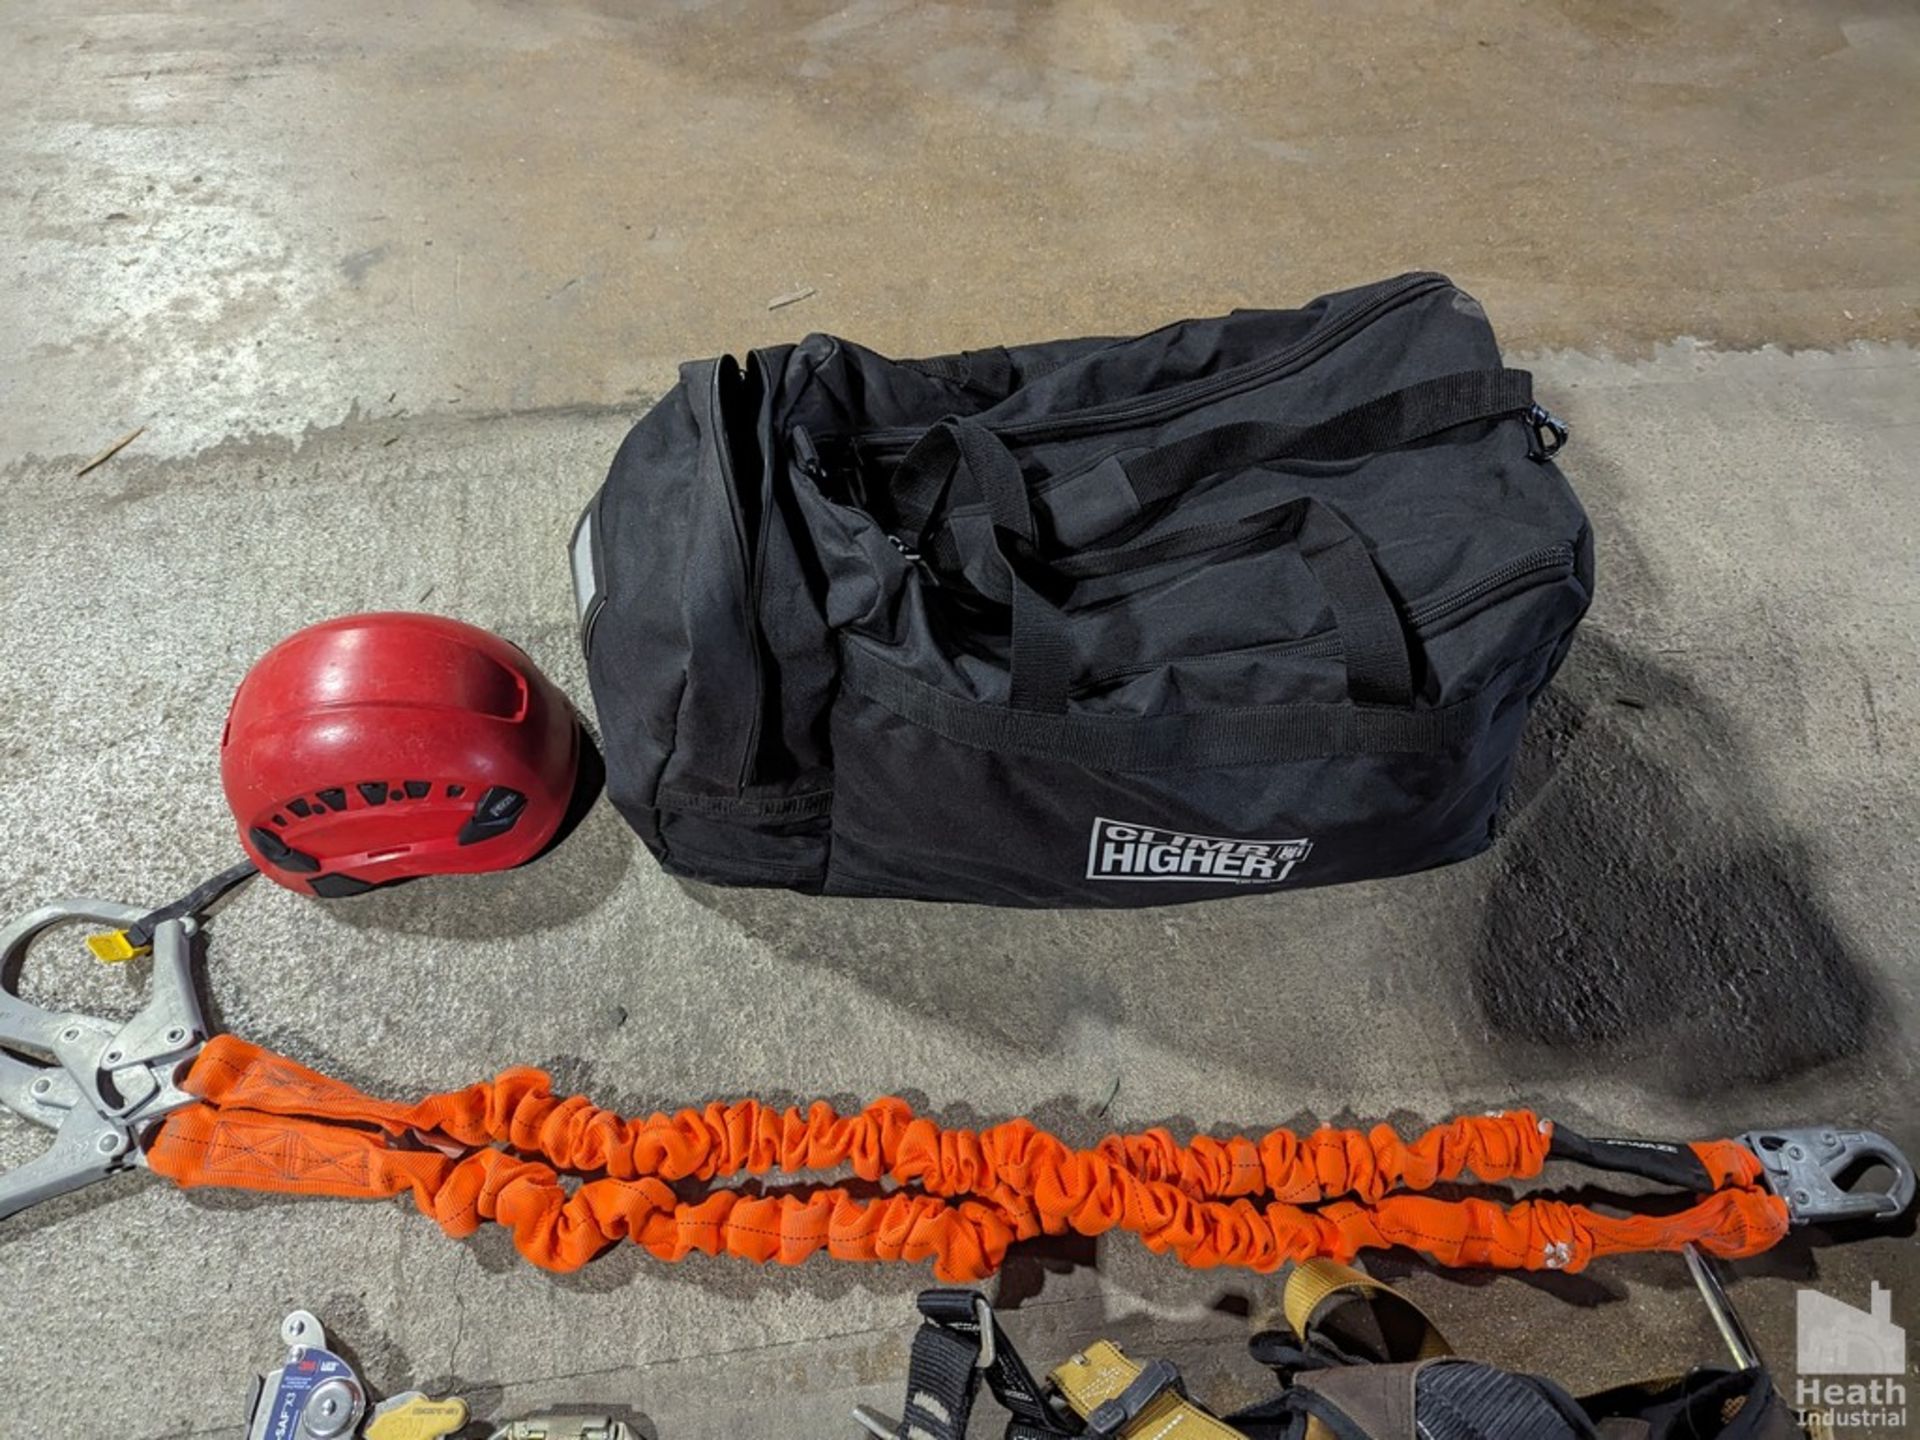 CLIMB HIGHER CLIMBING KIT: HARNESS, HELMET, CABLE SAFETY SLEEVE, BOLT BAGS, LANYARDS, SPREADER - Image 6 of 6